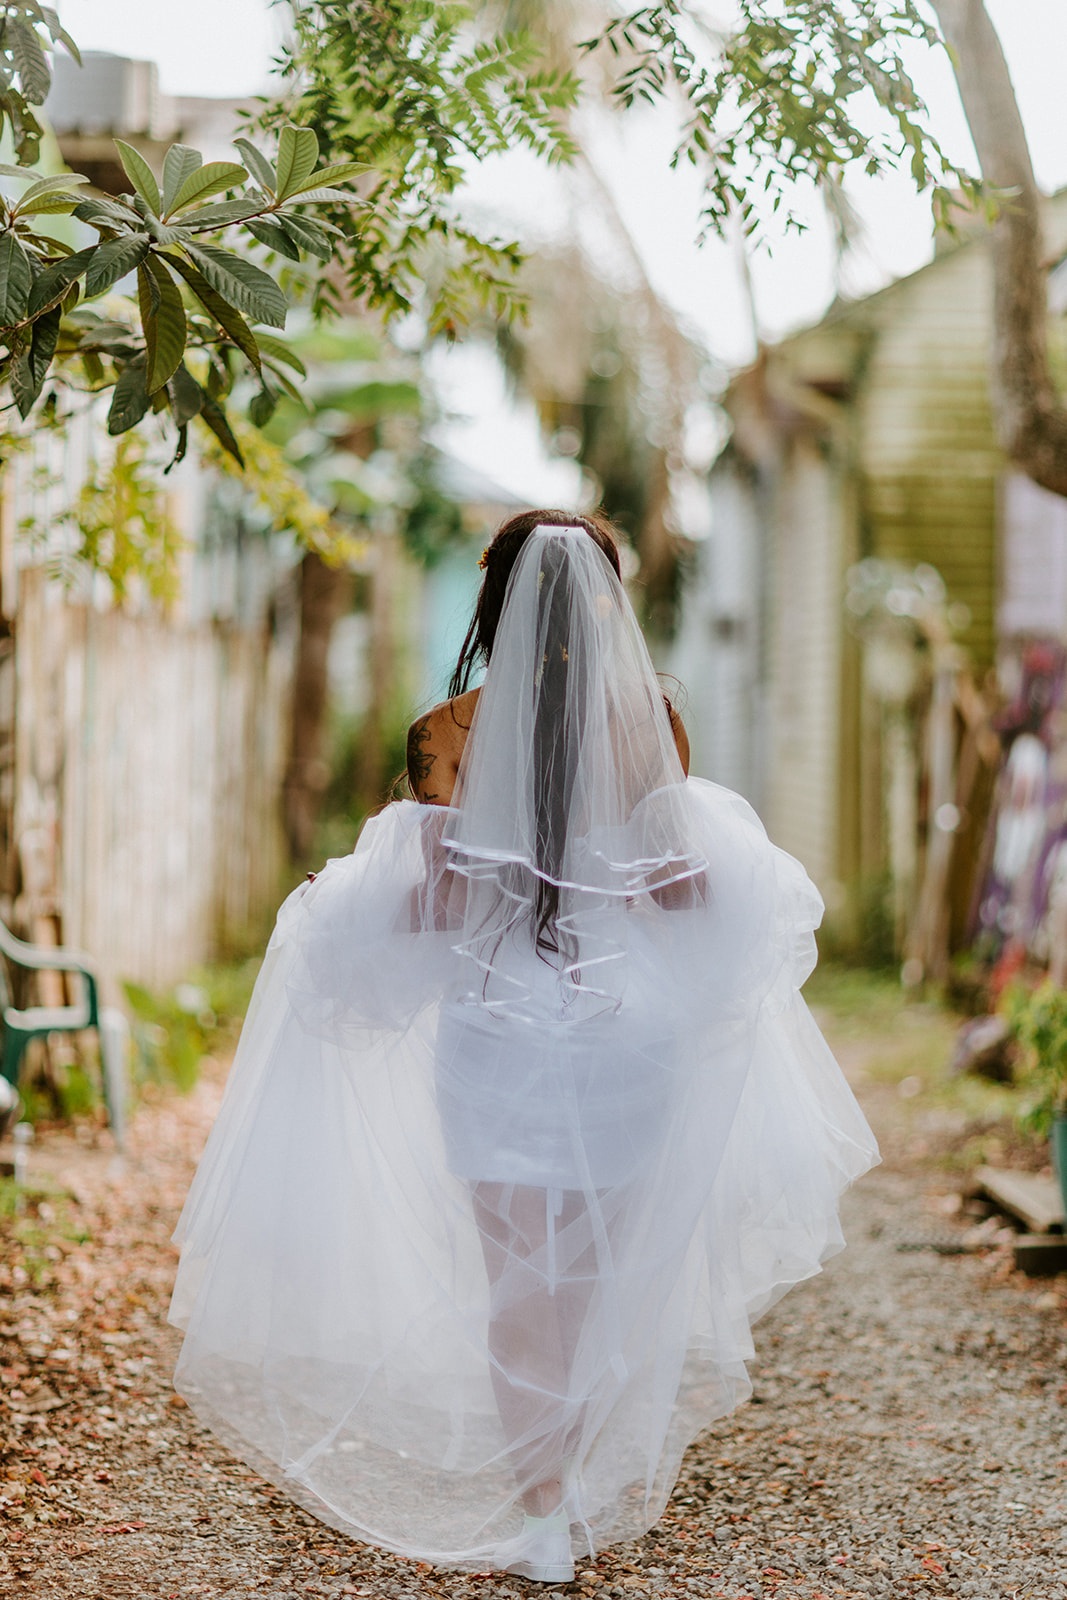 Halloween Inspired Self Marriage Ceremony in New Orleans